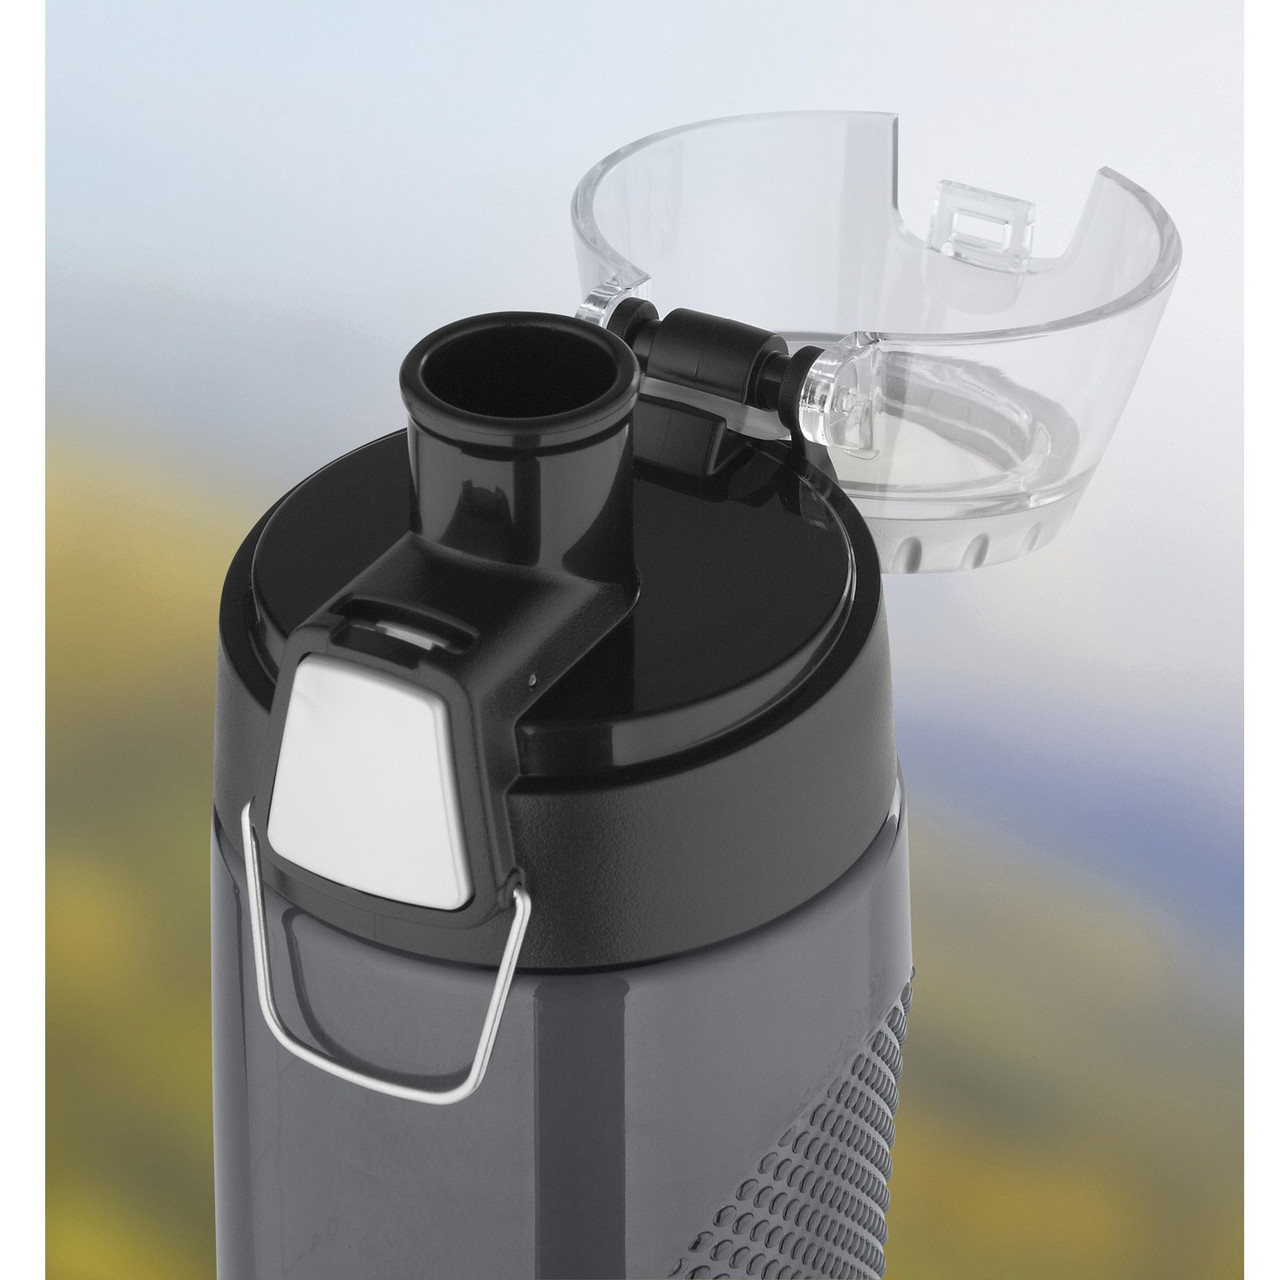 https://cdn2.bigcommerce.com/server3700/cd338/products/4623/images/19690/Thermos_Hydration_Bottle_with_Rotating_Intake_Meter_.7L_03__03028.1623393179.1280.1280.jpg?c=2